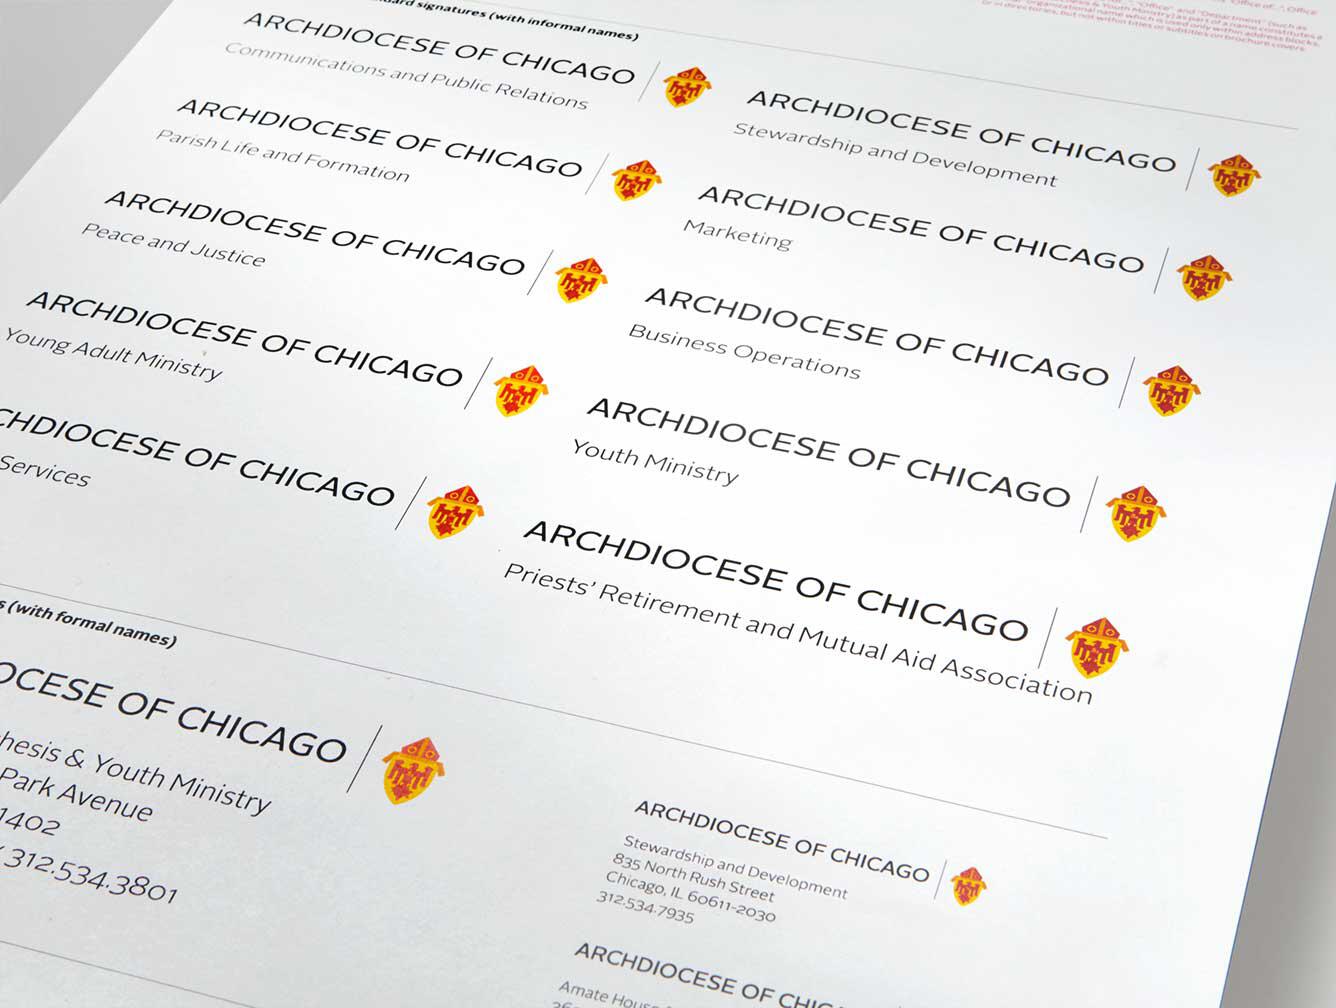 19A-08_Archdiocese of Chicago Branding Program_Bart Crosby/Gosia Sobus